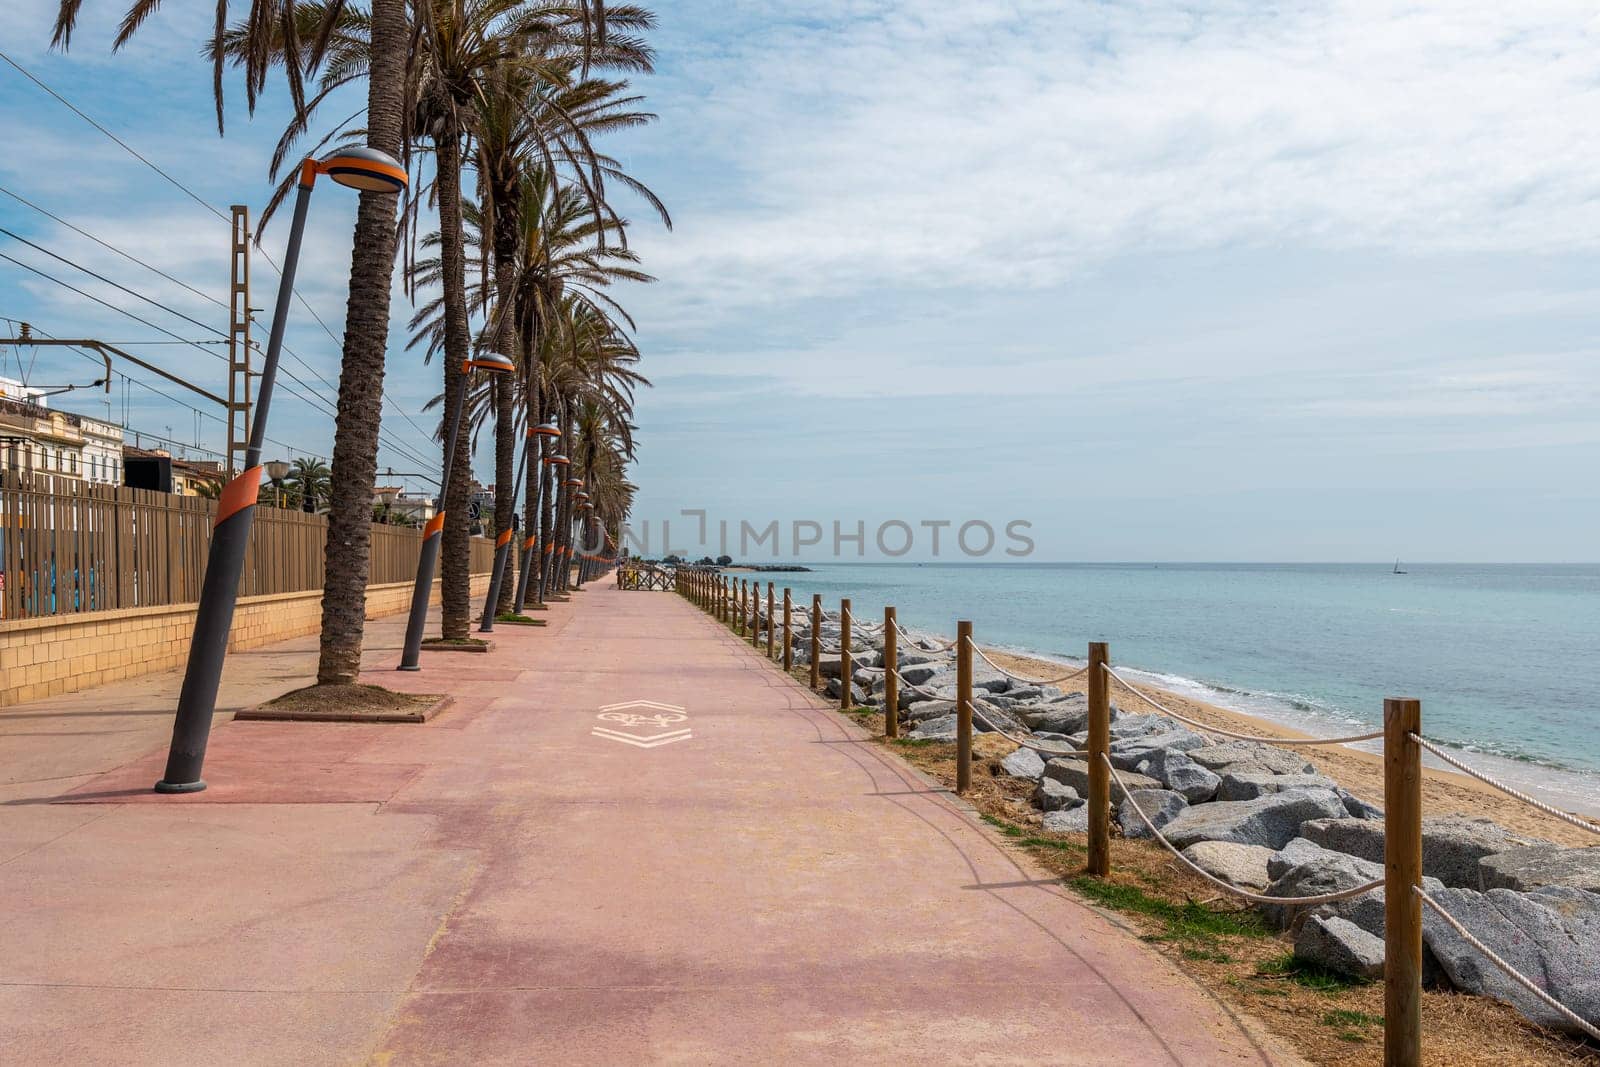 Waterfront with palms and street lamps row and sea sand beach with protective stones. Stylish villa buildings behind fence in Vilassar de Mar